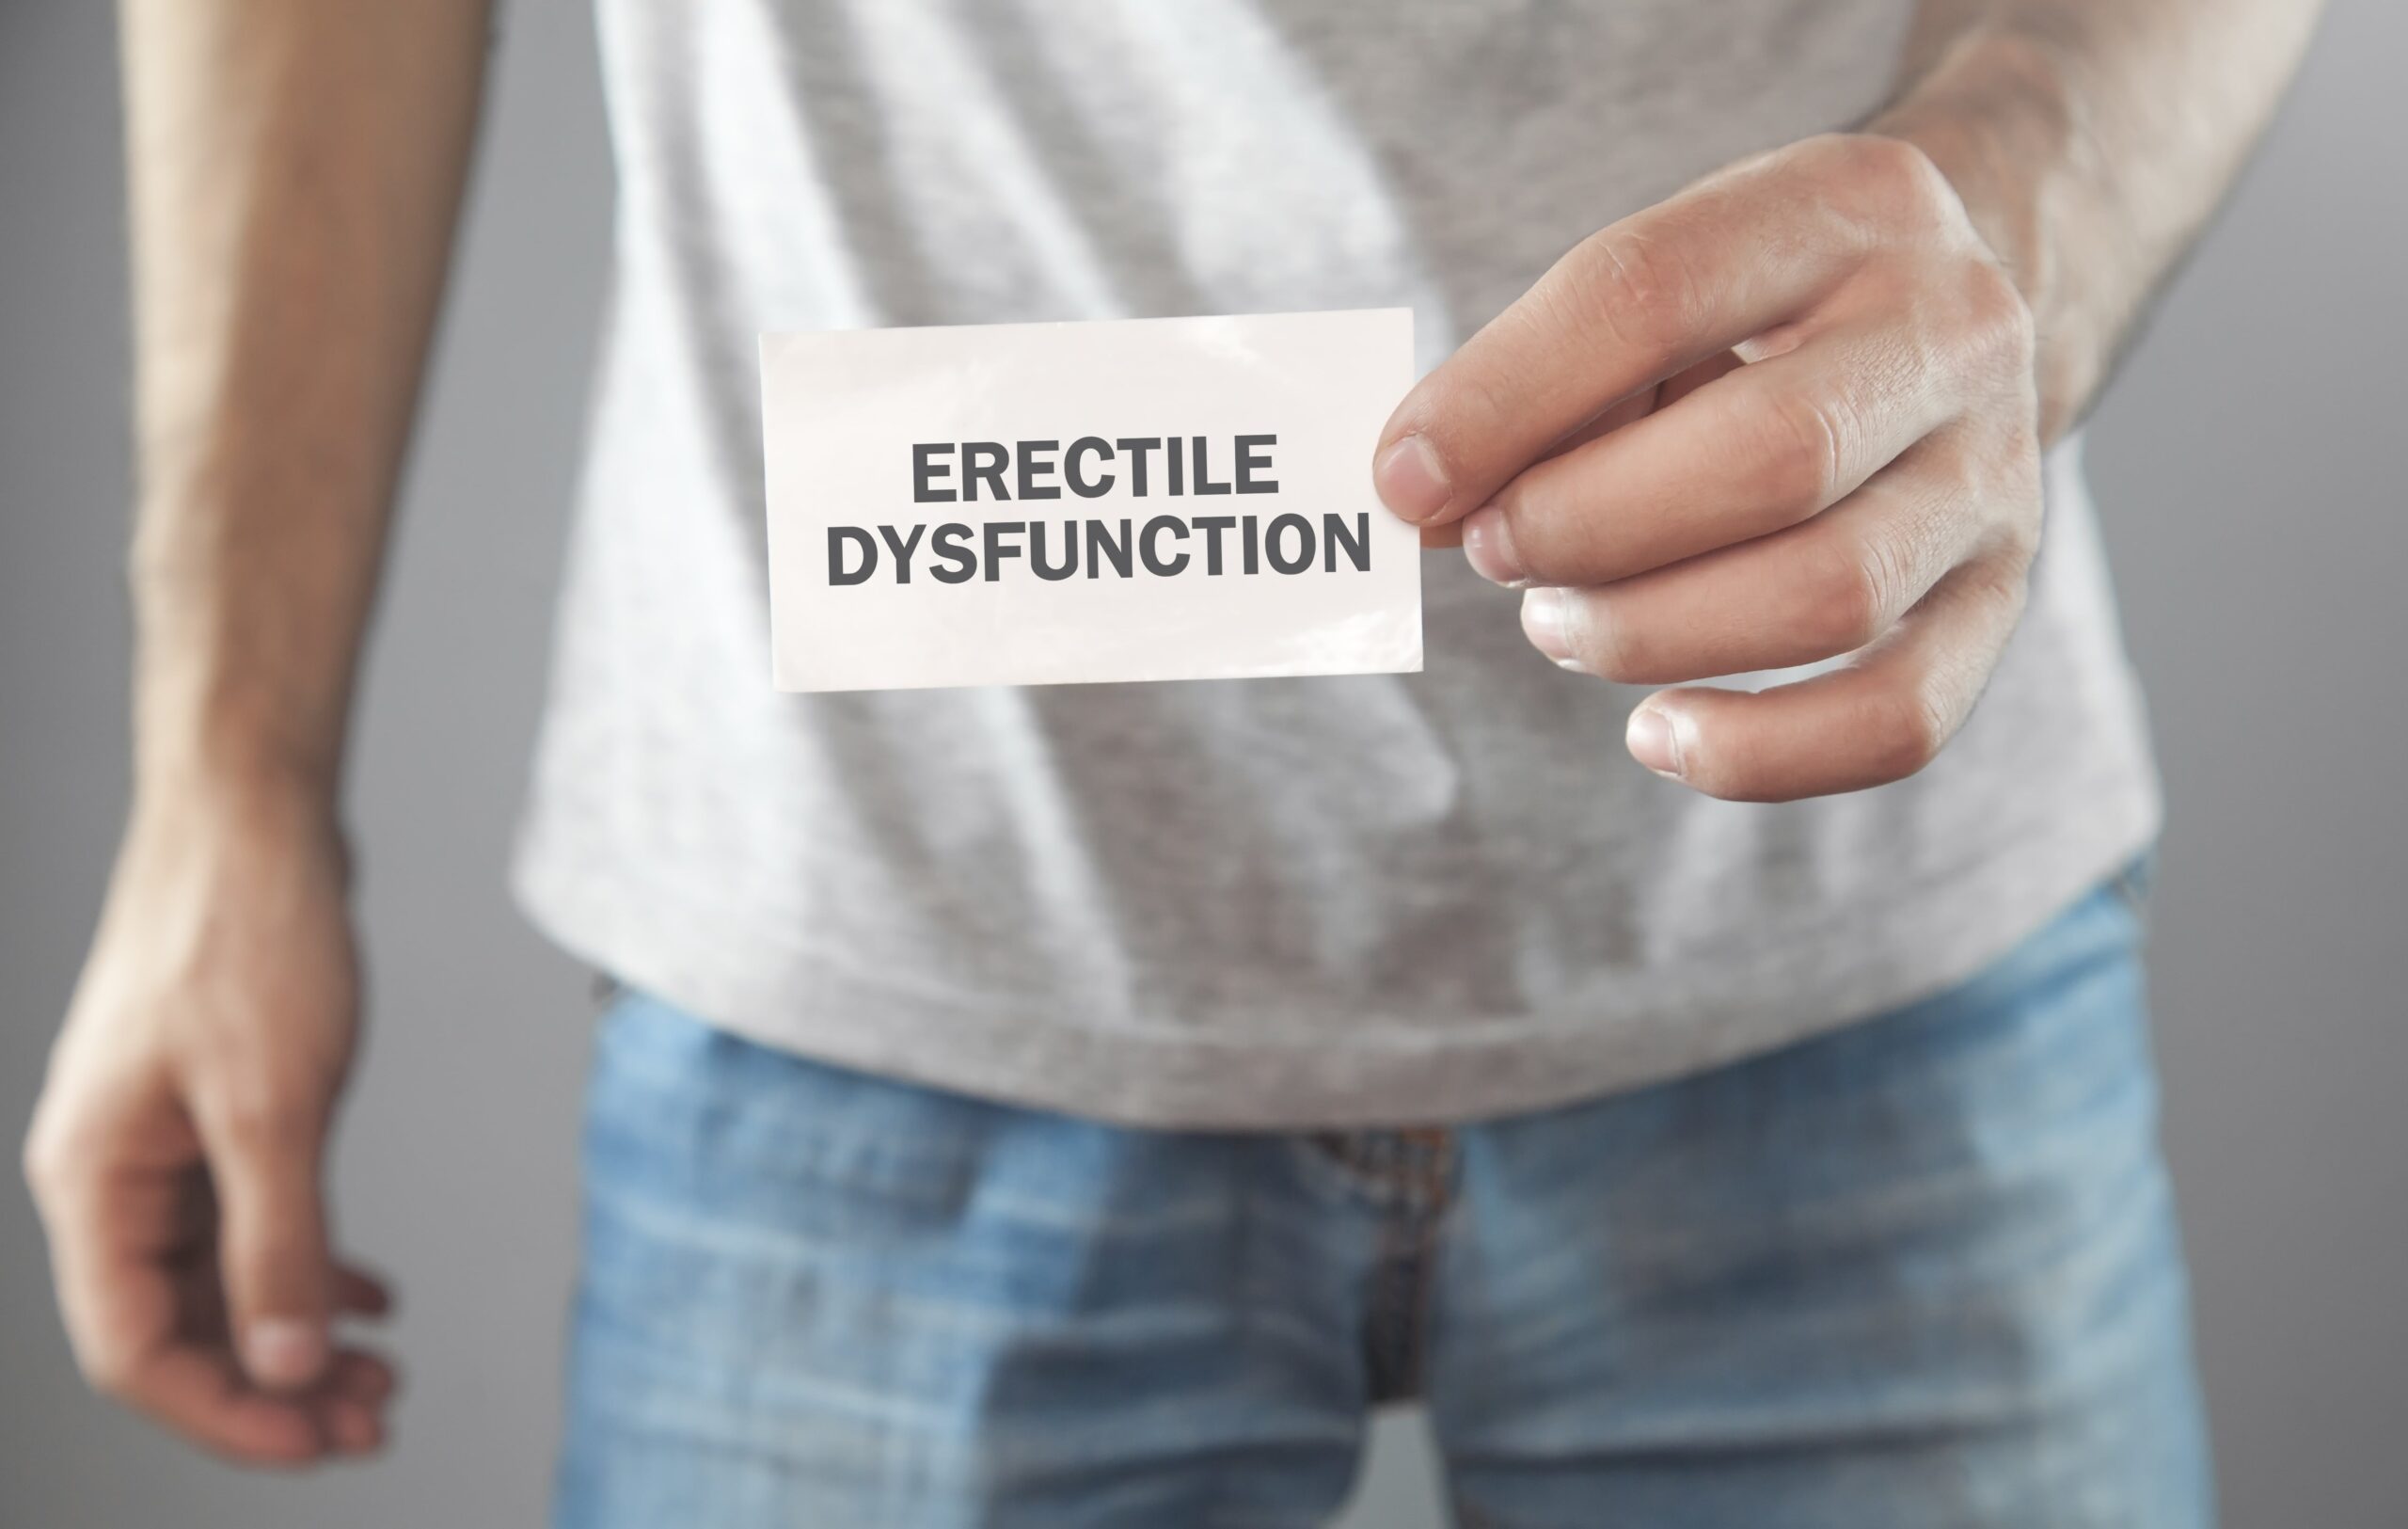 Myths and facts about Erectile Dysfunction